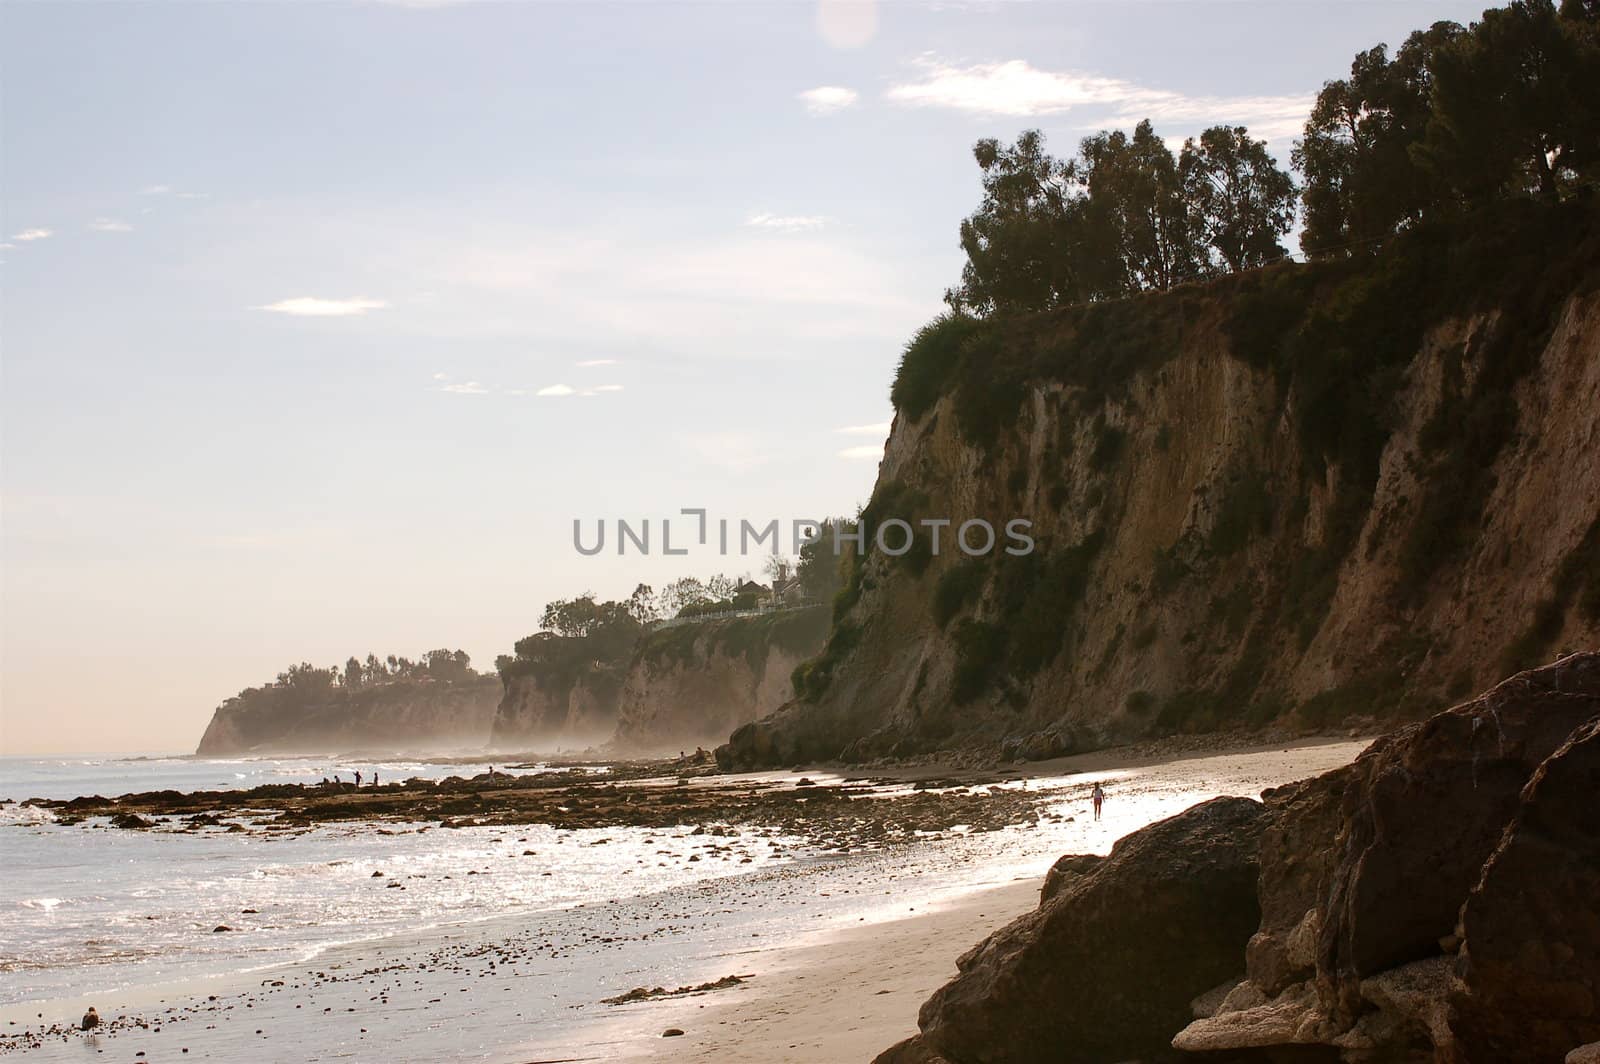 Daytime shot of the deeply curved cove at Paradise Cove in Malibu, Southern California.  Steep cliffs, trees, sand and ocean.